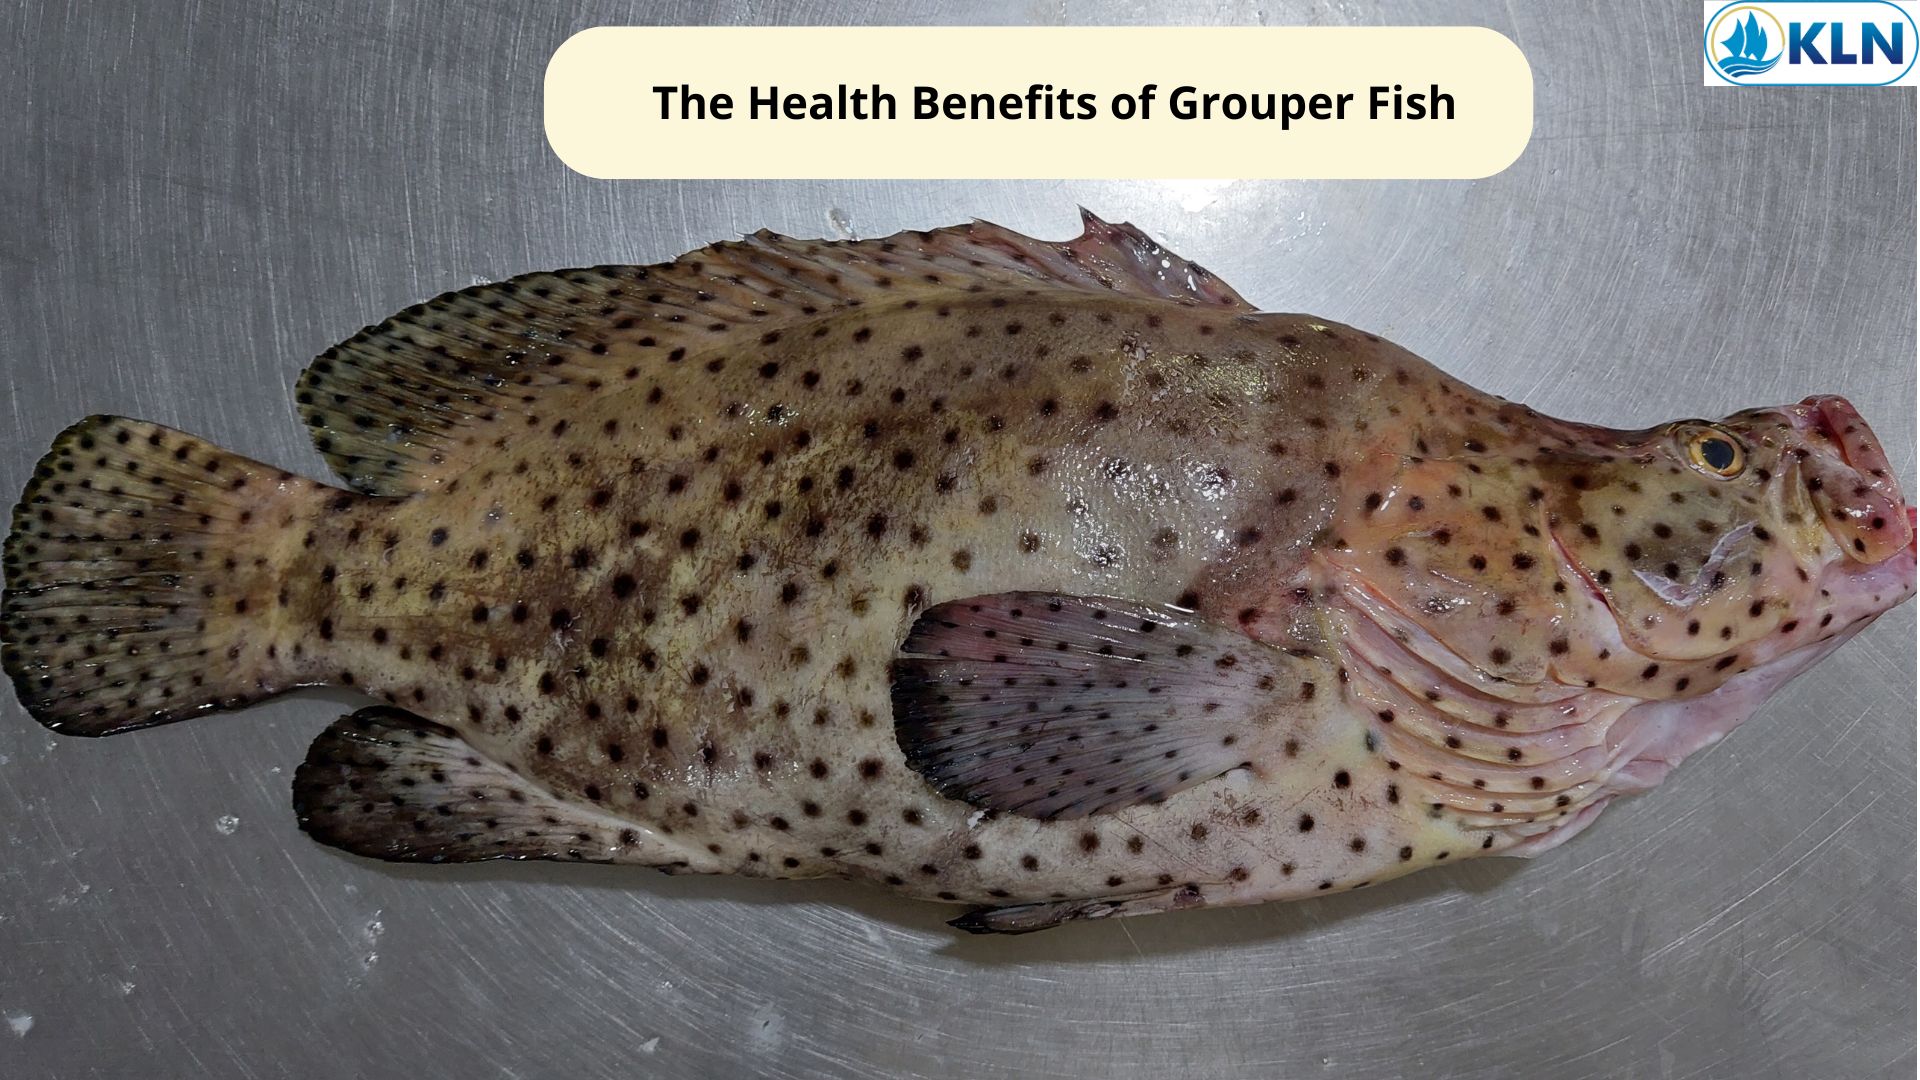 The Health Benefits of Grouper Fish